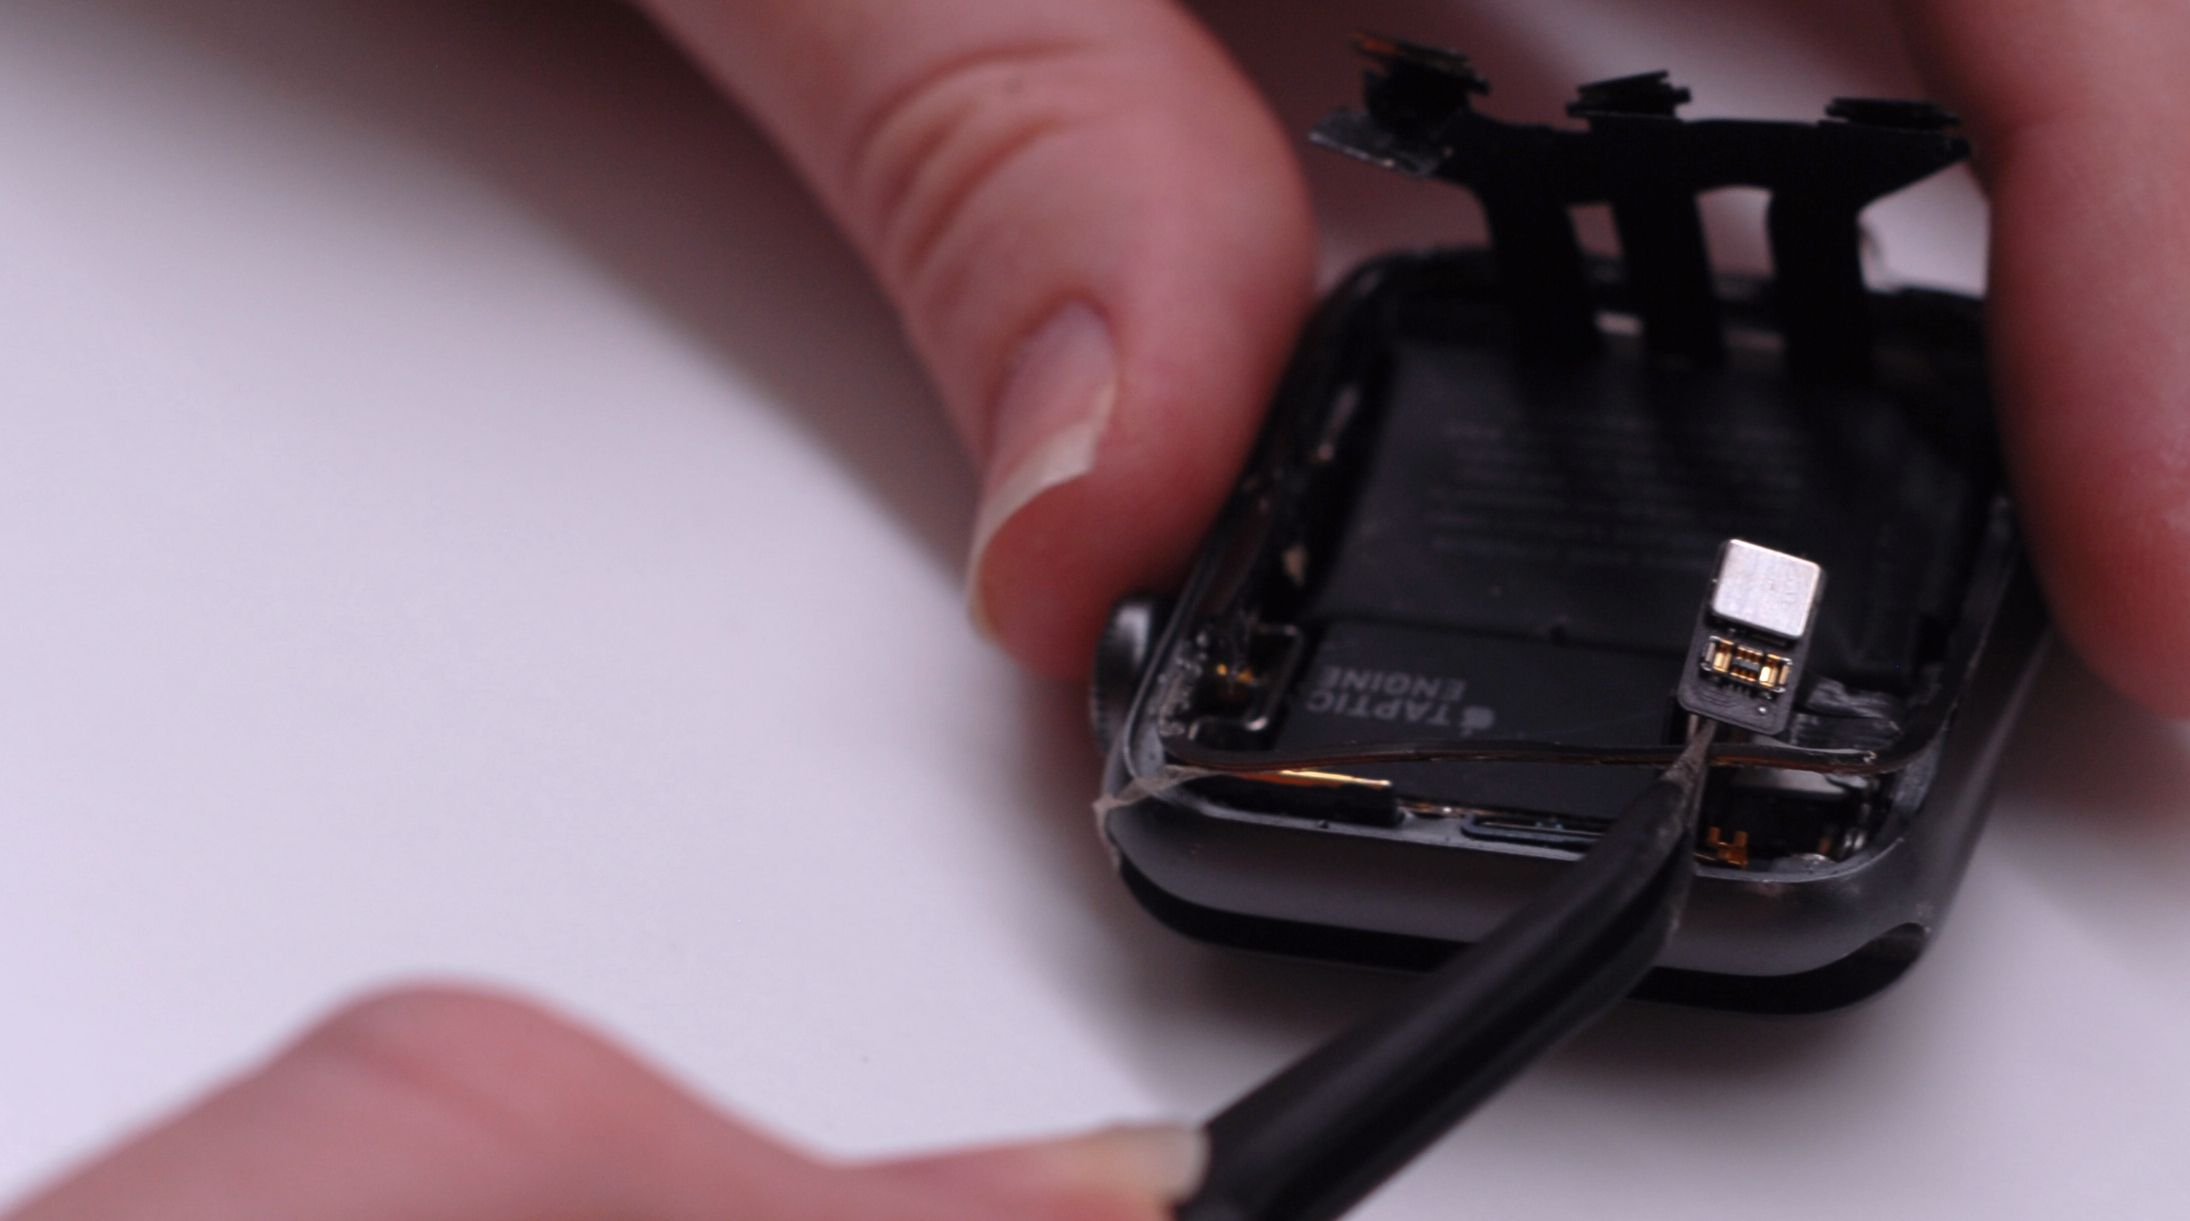 installing the new force touch sensor in the apple watch